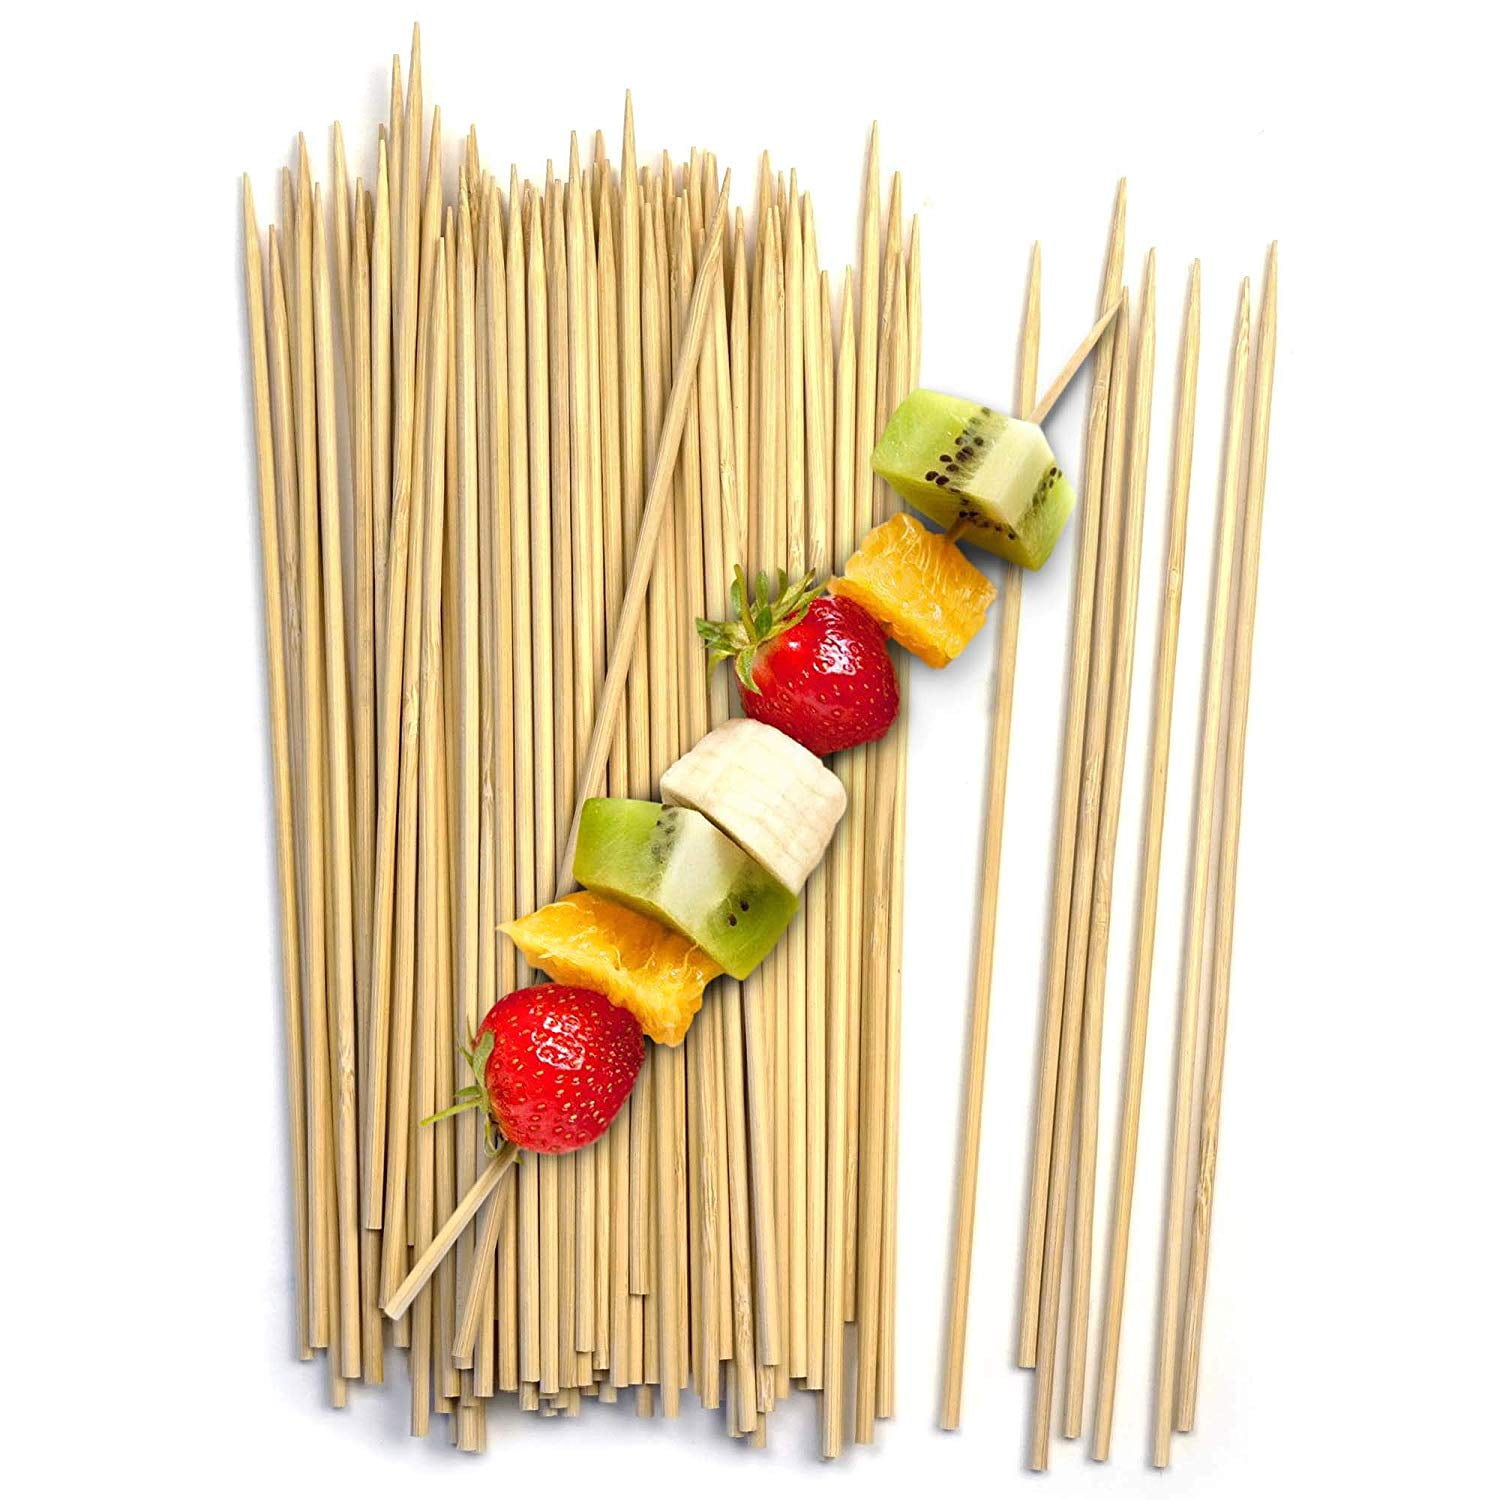 Bamboo BBQ Skewers 6 inches 100pcs S-3774 